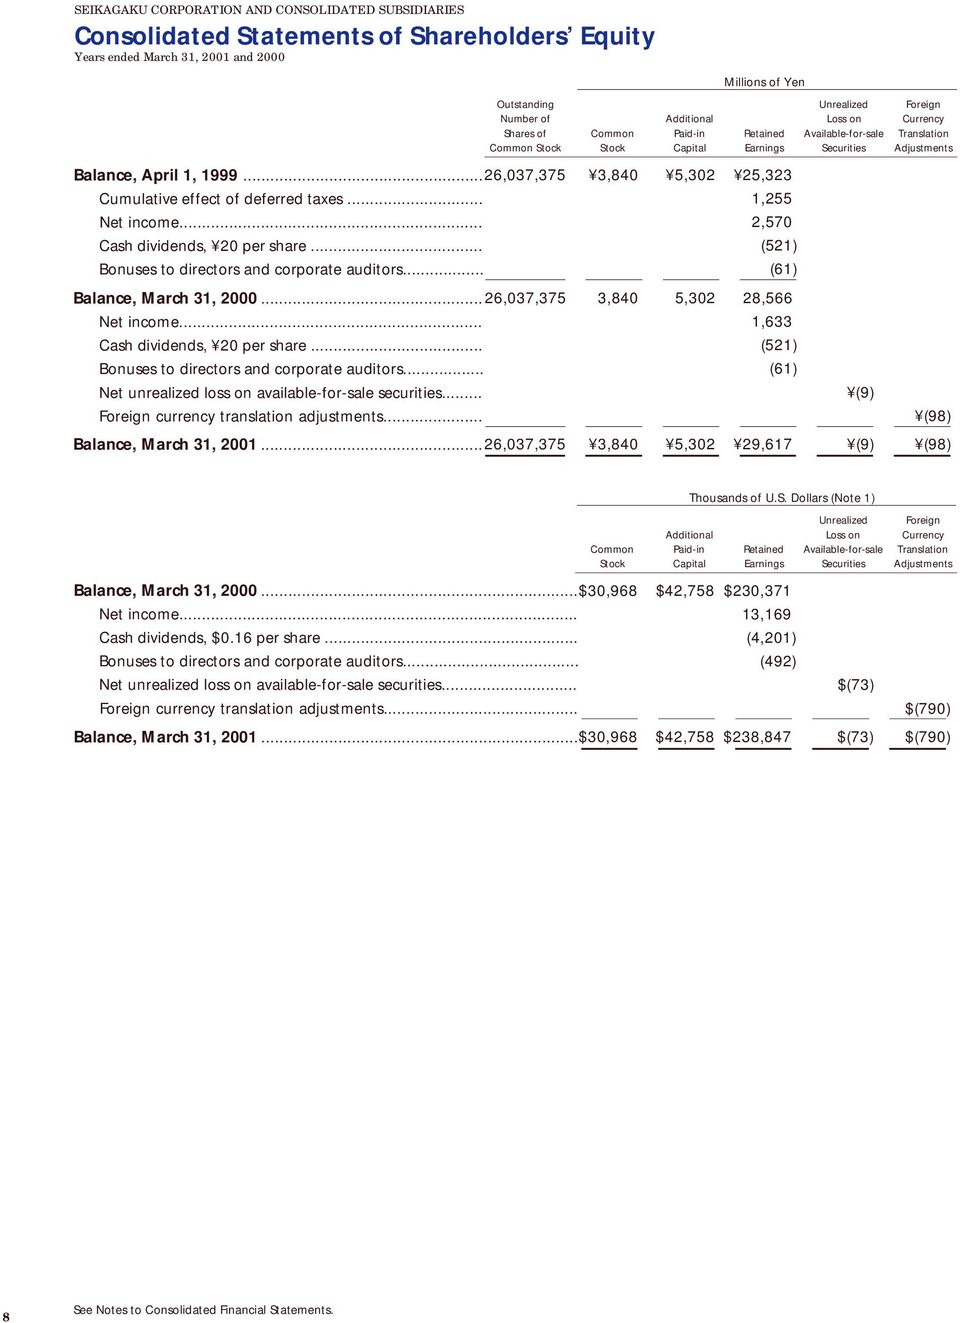 .. 26,037,375 Cumulative effect of deferred taxes... Net income... Cash dividends, 20 per share... Bonuses to directors and corporate auditors.